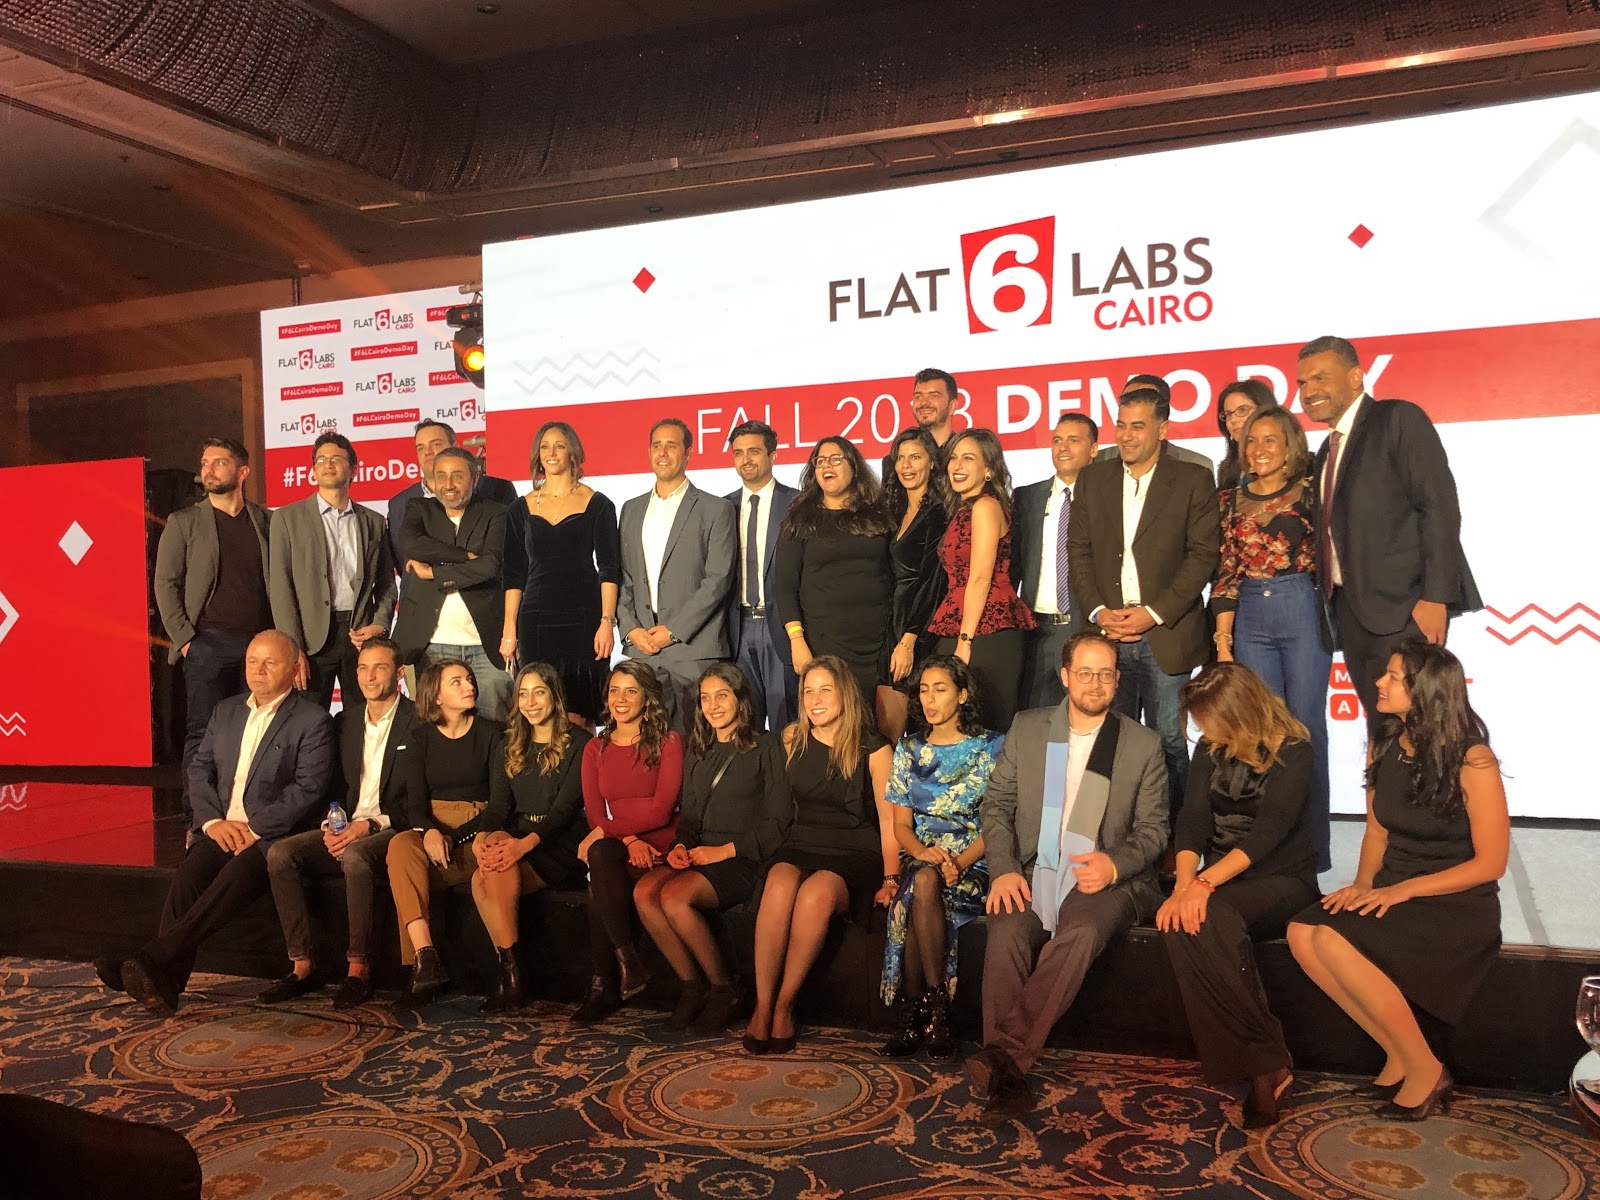 8 New Startups Graduate From Flat6Labs in its 11th Cycle